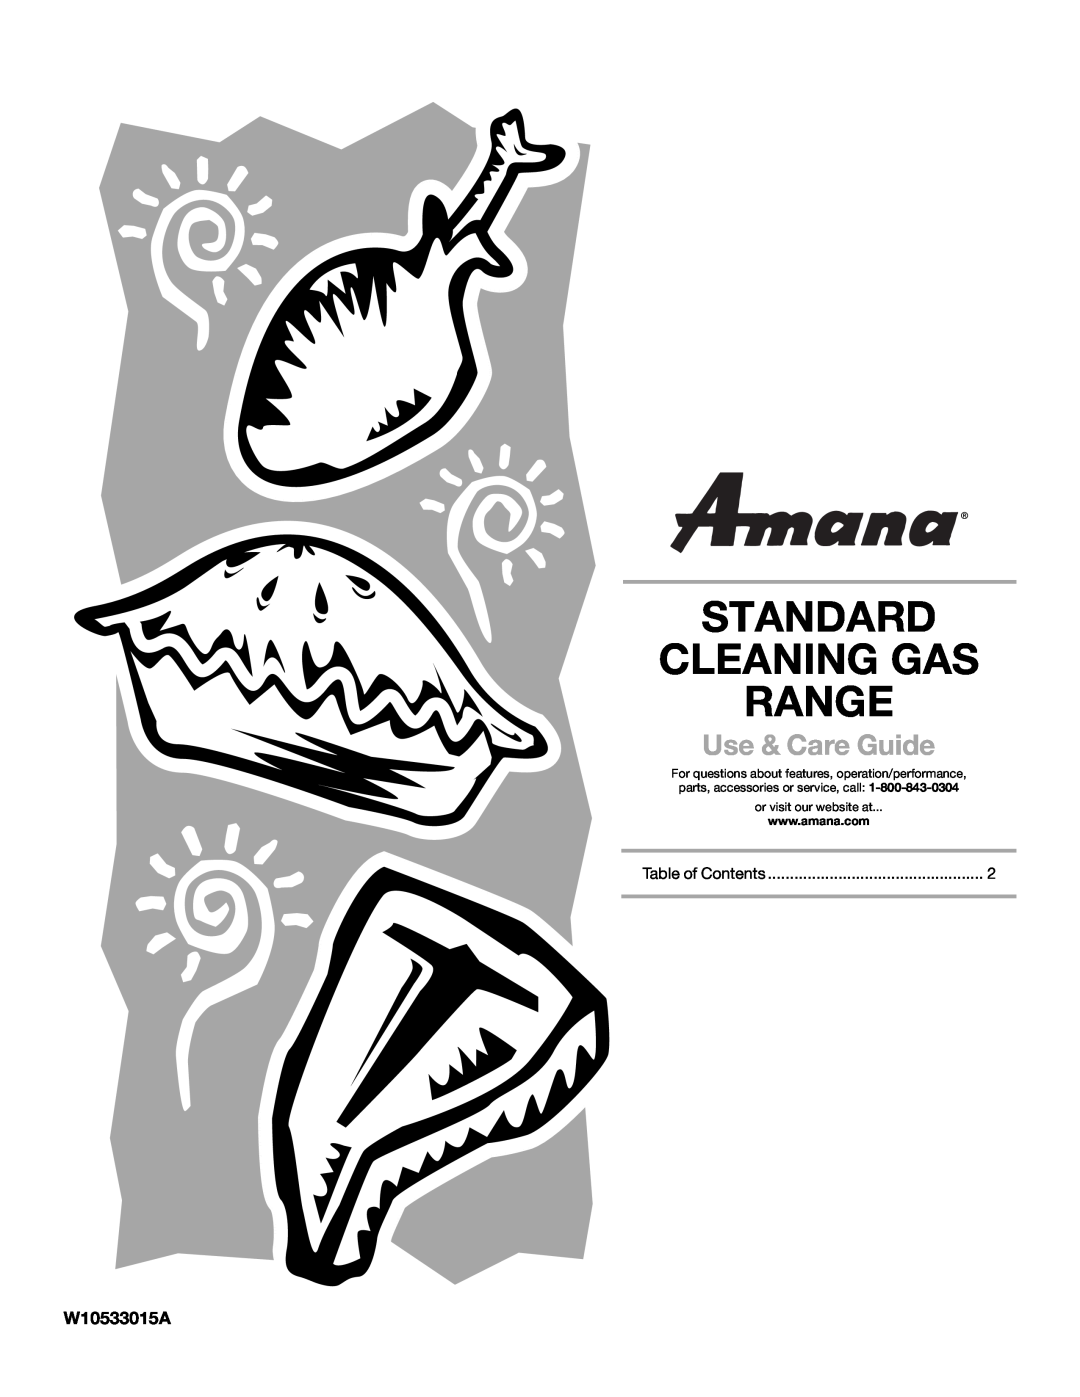 Amana W10533015A manual Standard Cleaning Gas Range, Use & Care Guide, or visit our website at 